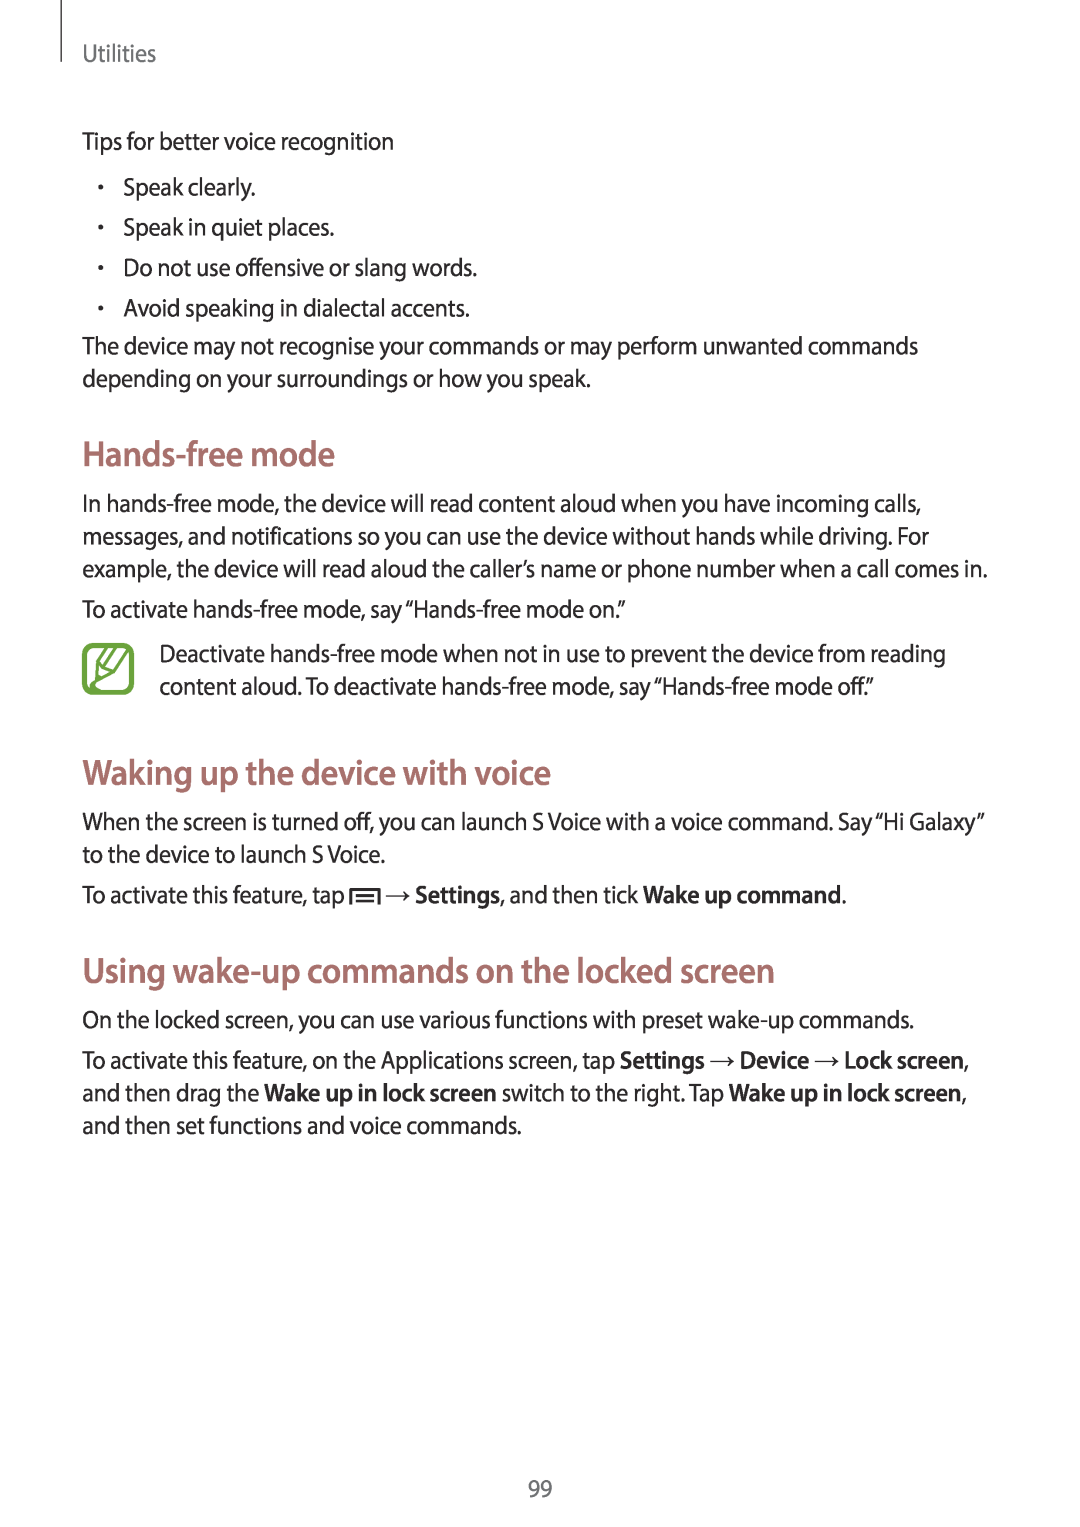 Samsung SM-G7105ZWAFTM manual Hands-free mode, Waking up the device with voice, Using wake-up commands on the locked screen 